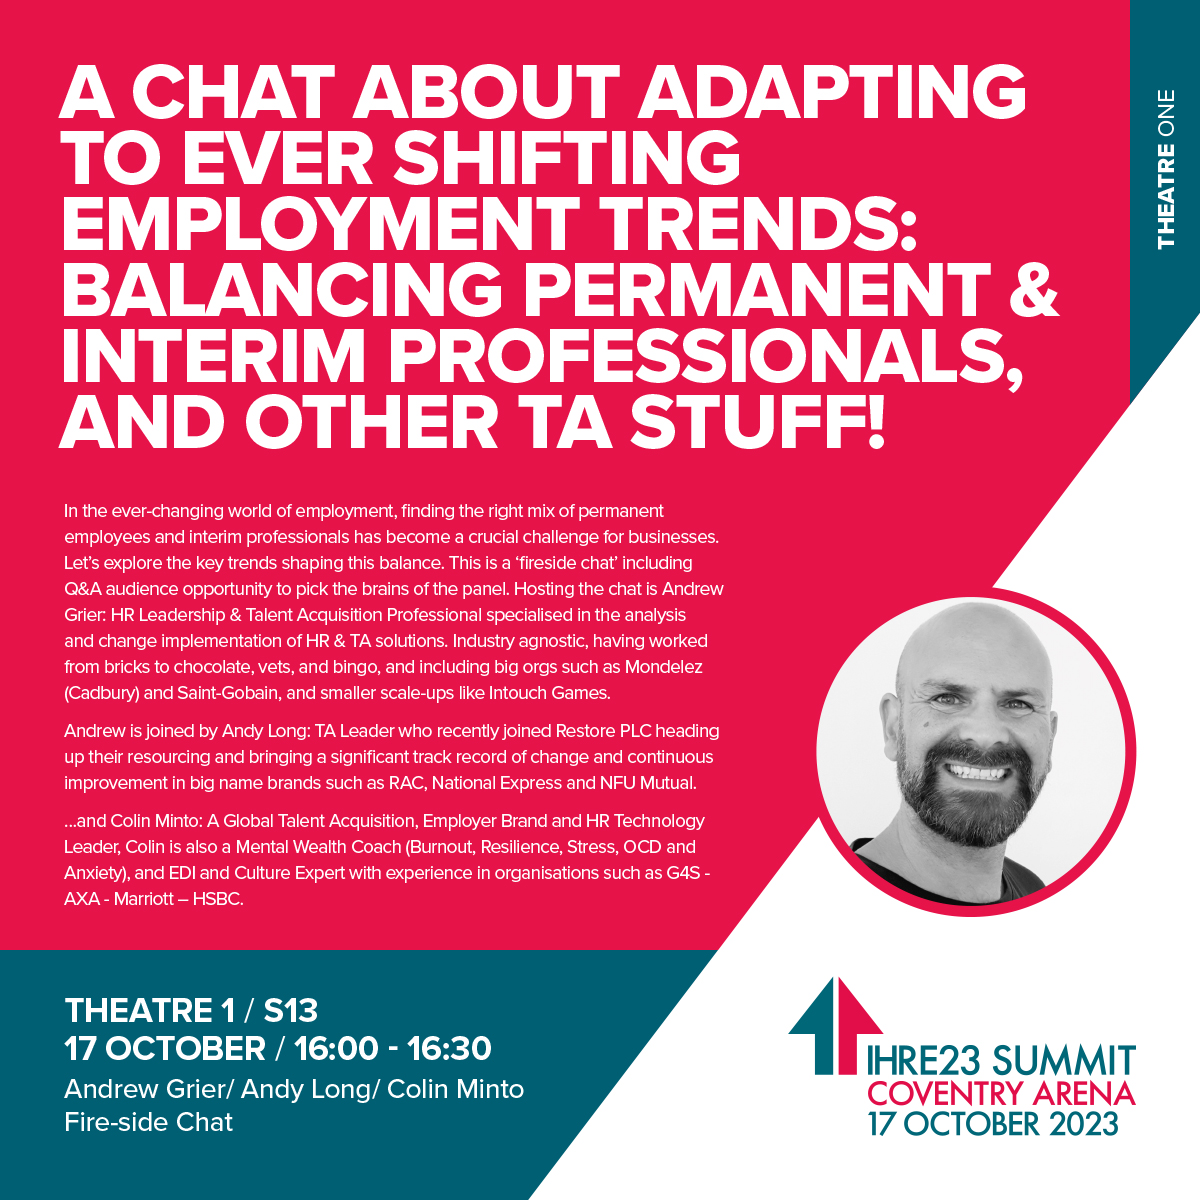 Closing session of the day coming up @ #IHRE23Summit: A chat about adapting to ever Shifting Employment Trends: Balancing Permanent & Interim Professionals, and other TA stuff! @ Andrew Grier,  Andy Long, Colin Minto #firesidechat #TALeaders #employmenttrends